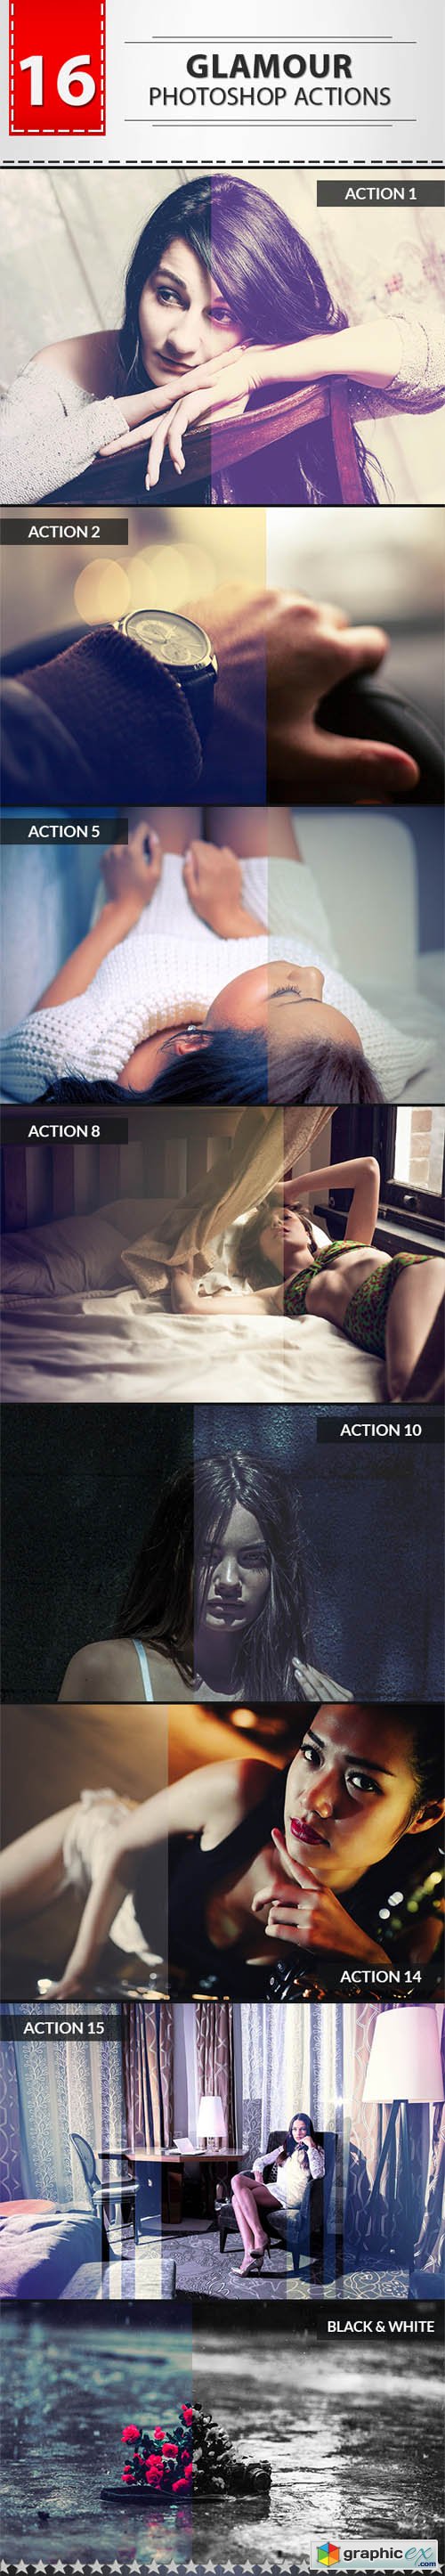 16 Glamour Photoshop Actions